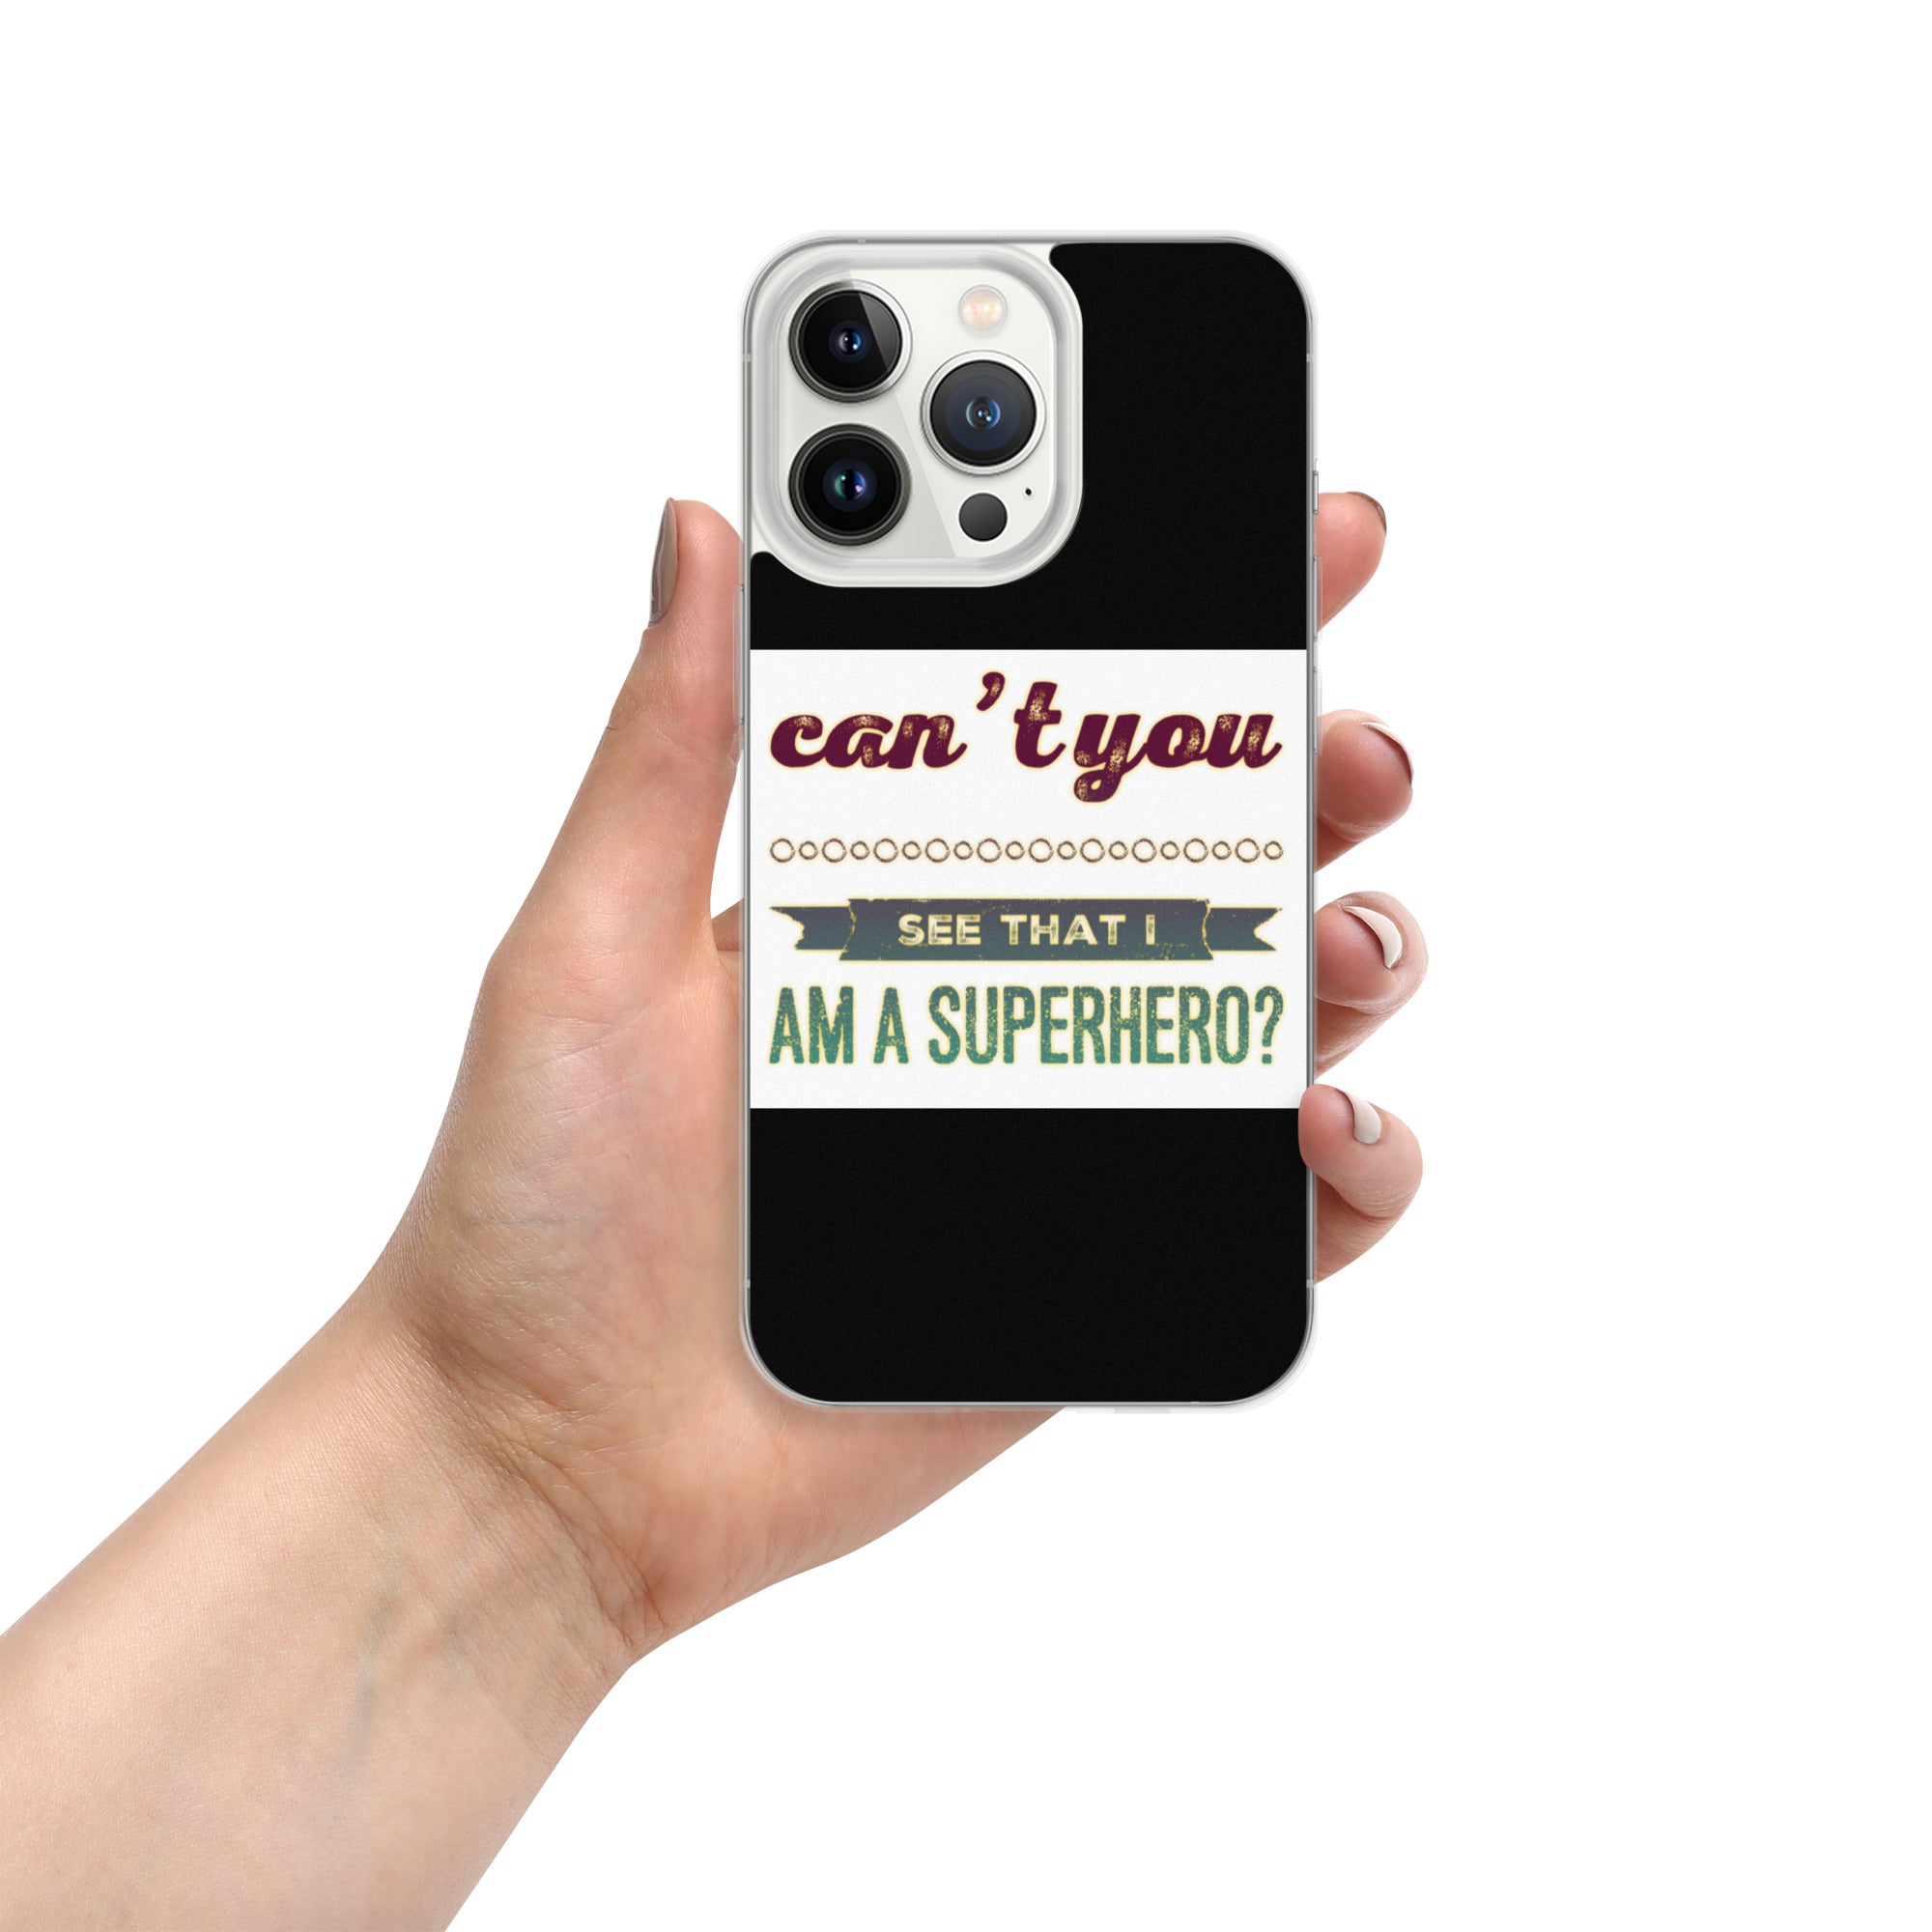 GloWell Designs - iPhone Case - Affirmation Quote - I Am a Superhero - GloWell Designs